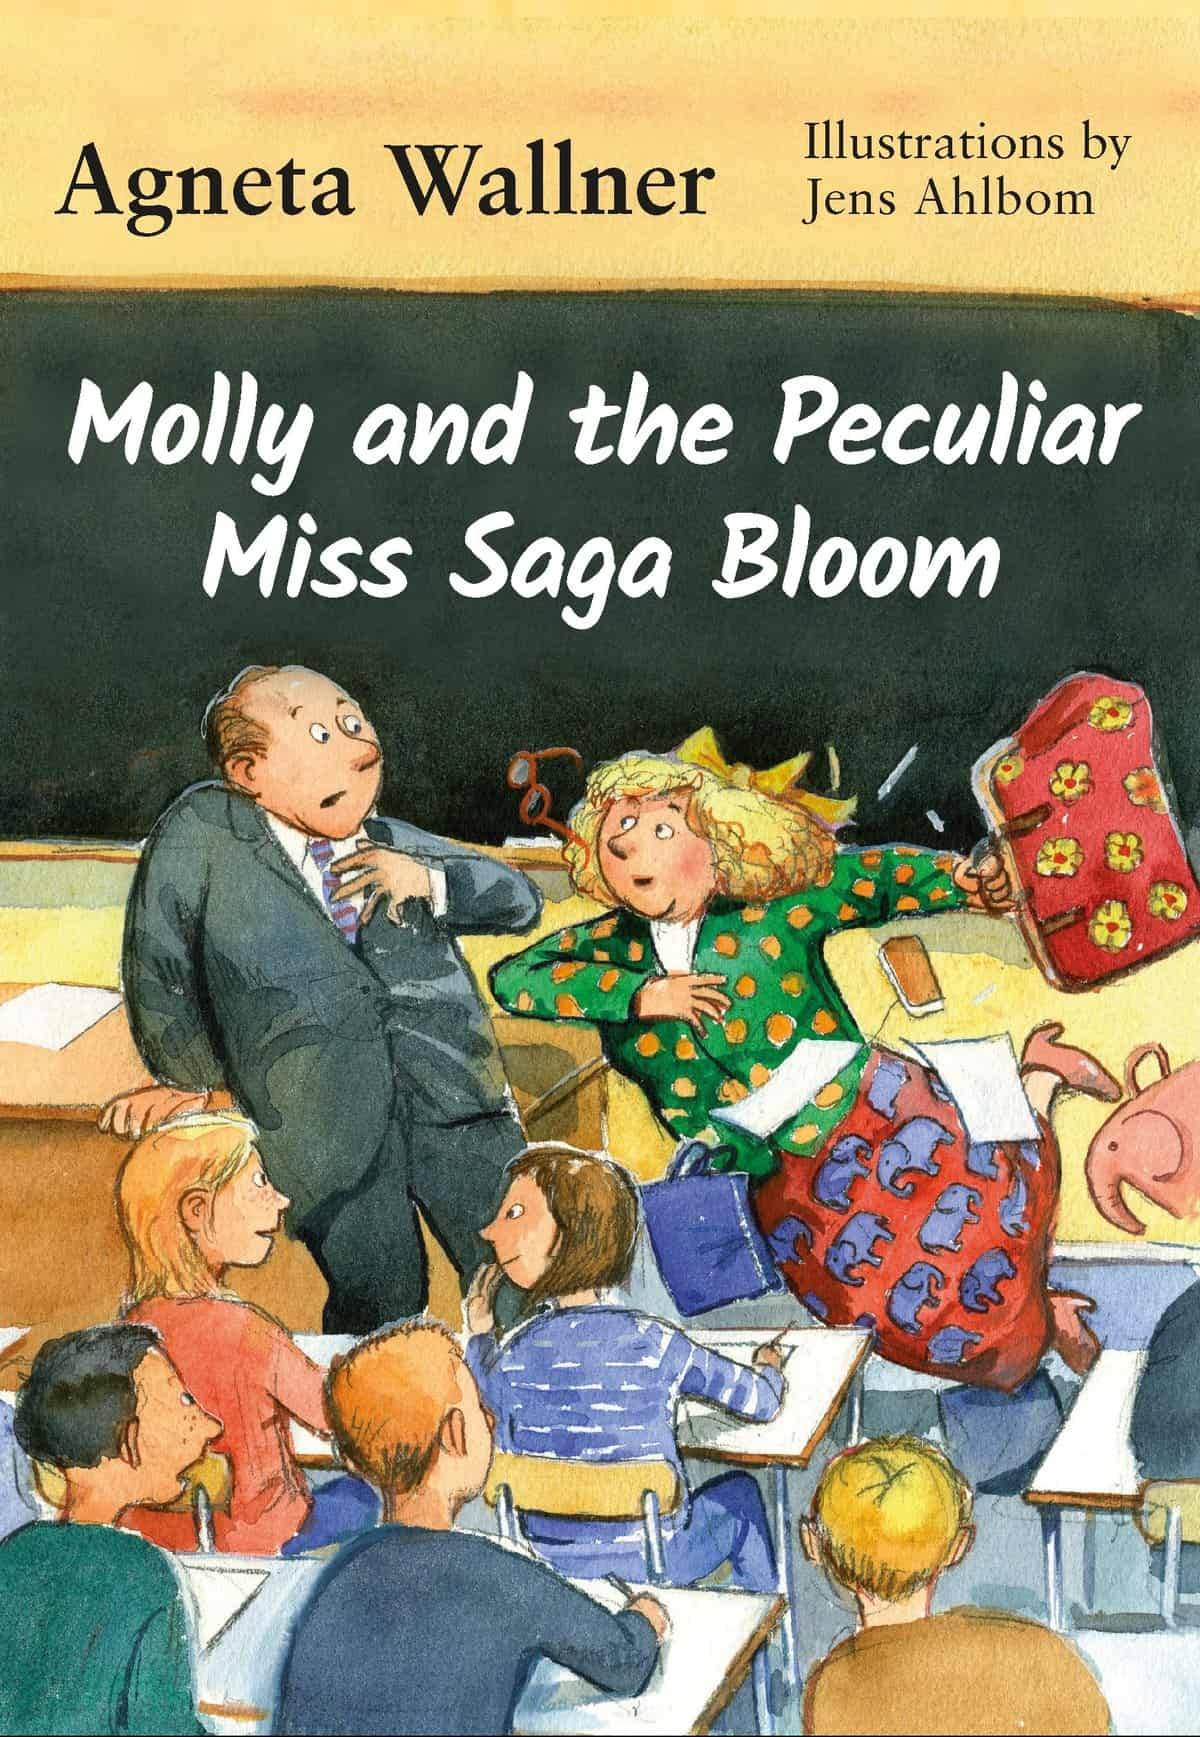 Molly and the Peculiar Miss Saga Bloom